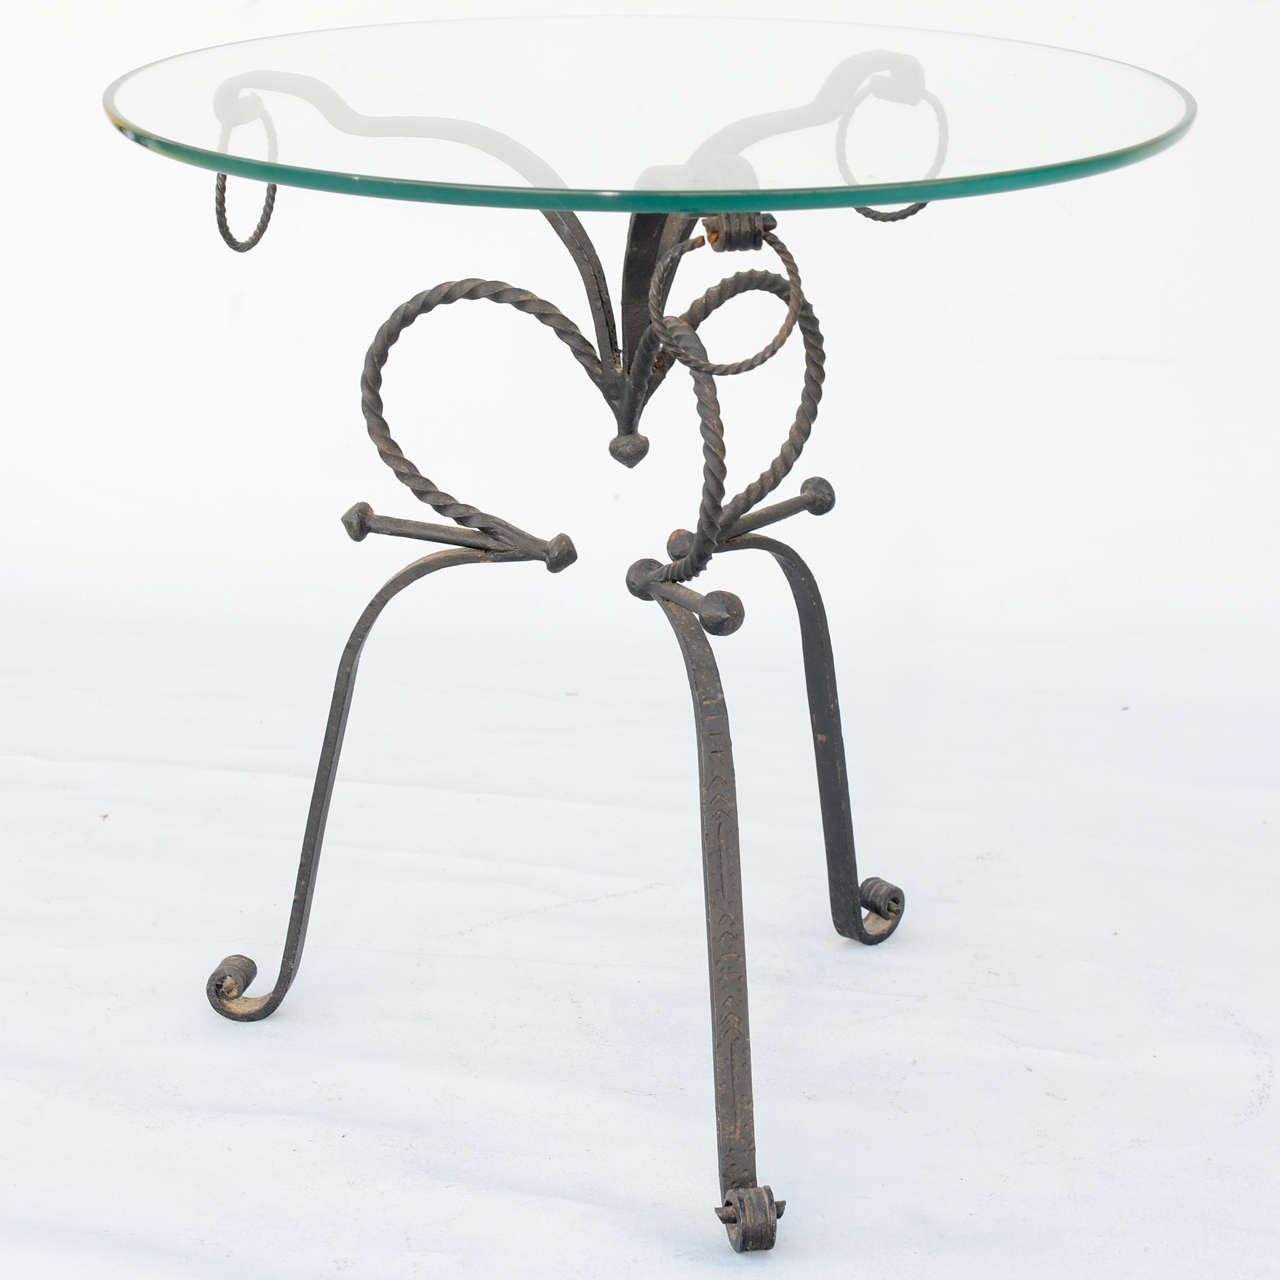 Unusual Wrought Iron Table In Excellent Condition For Sale In West Palm Beach, FL